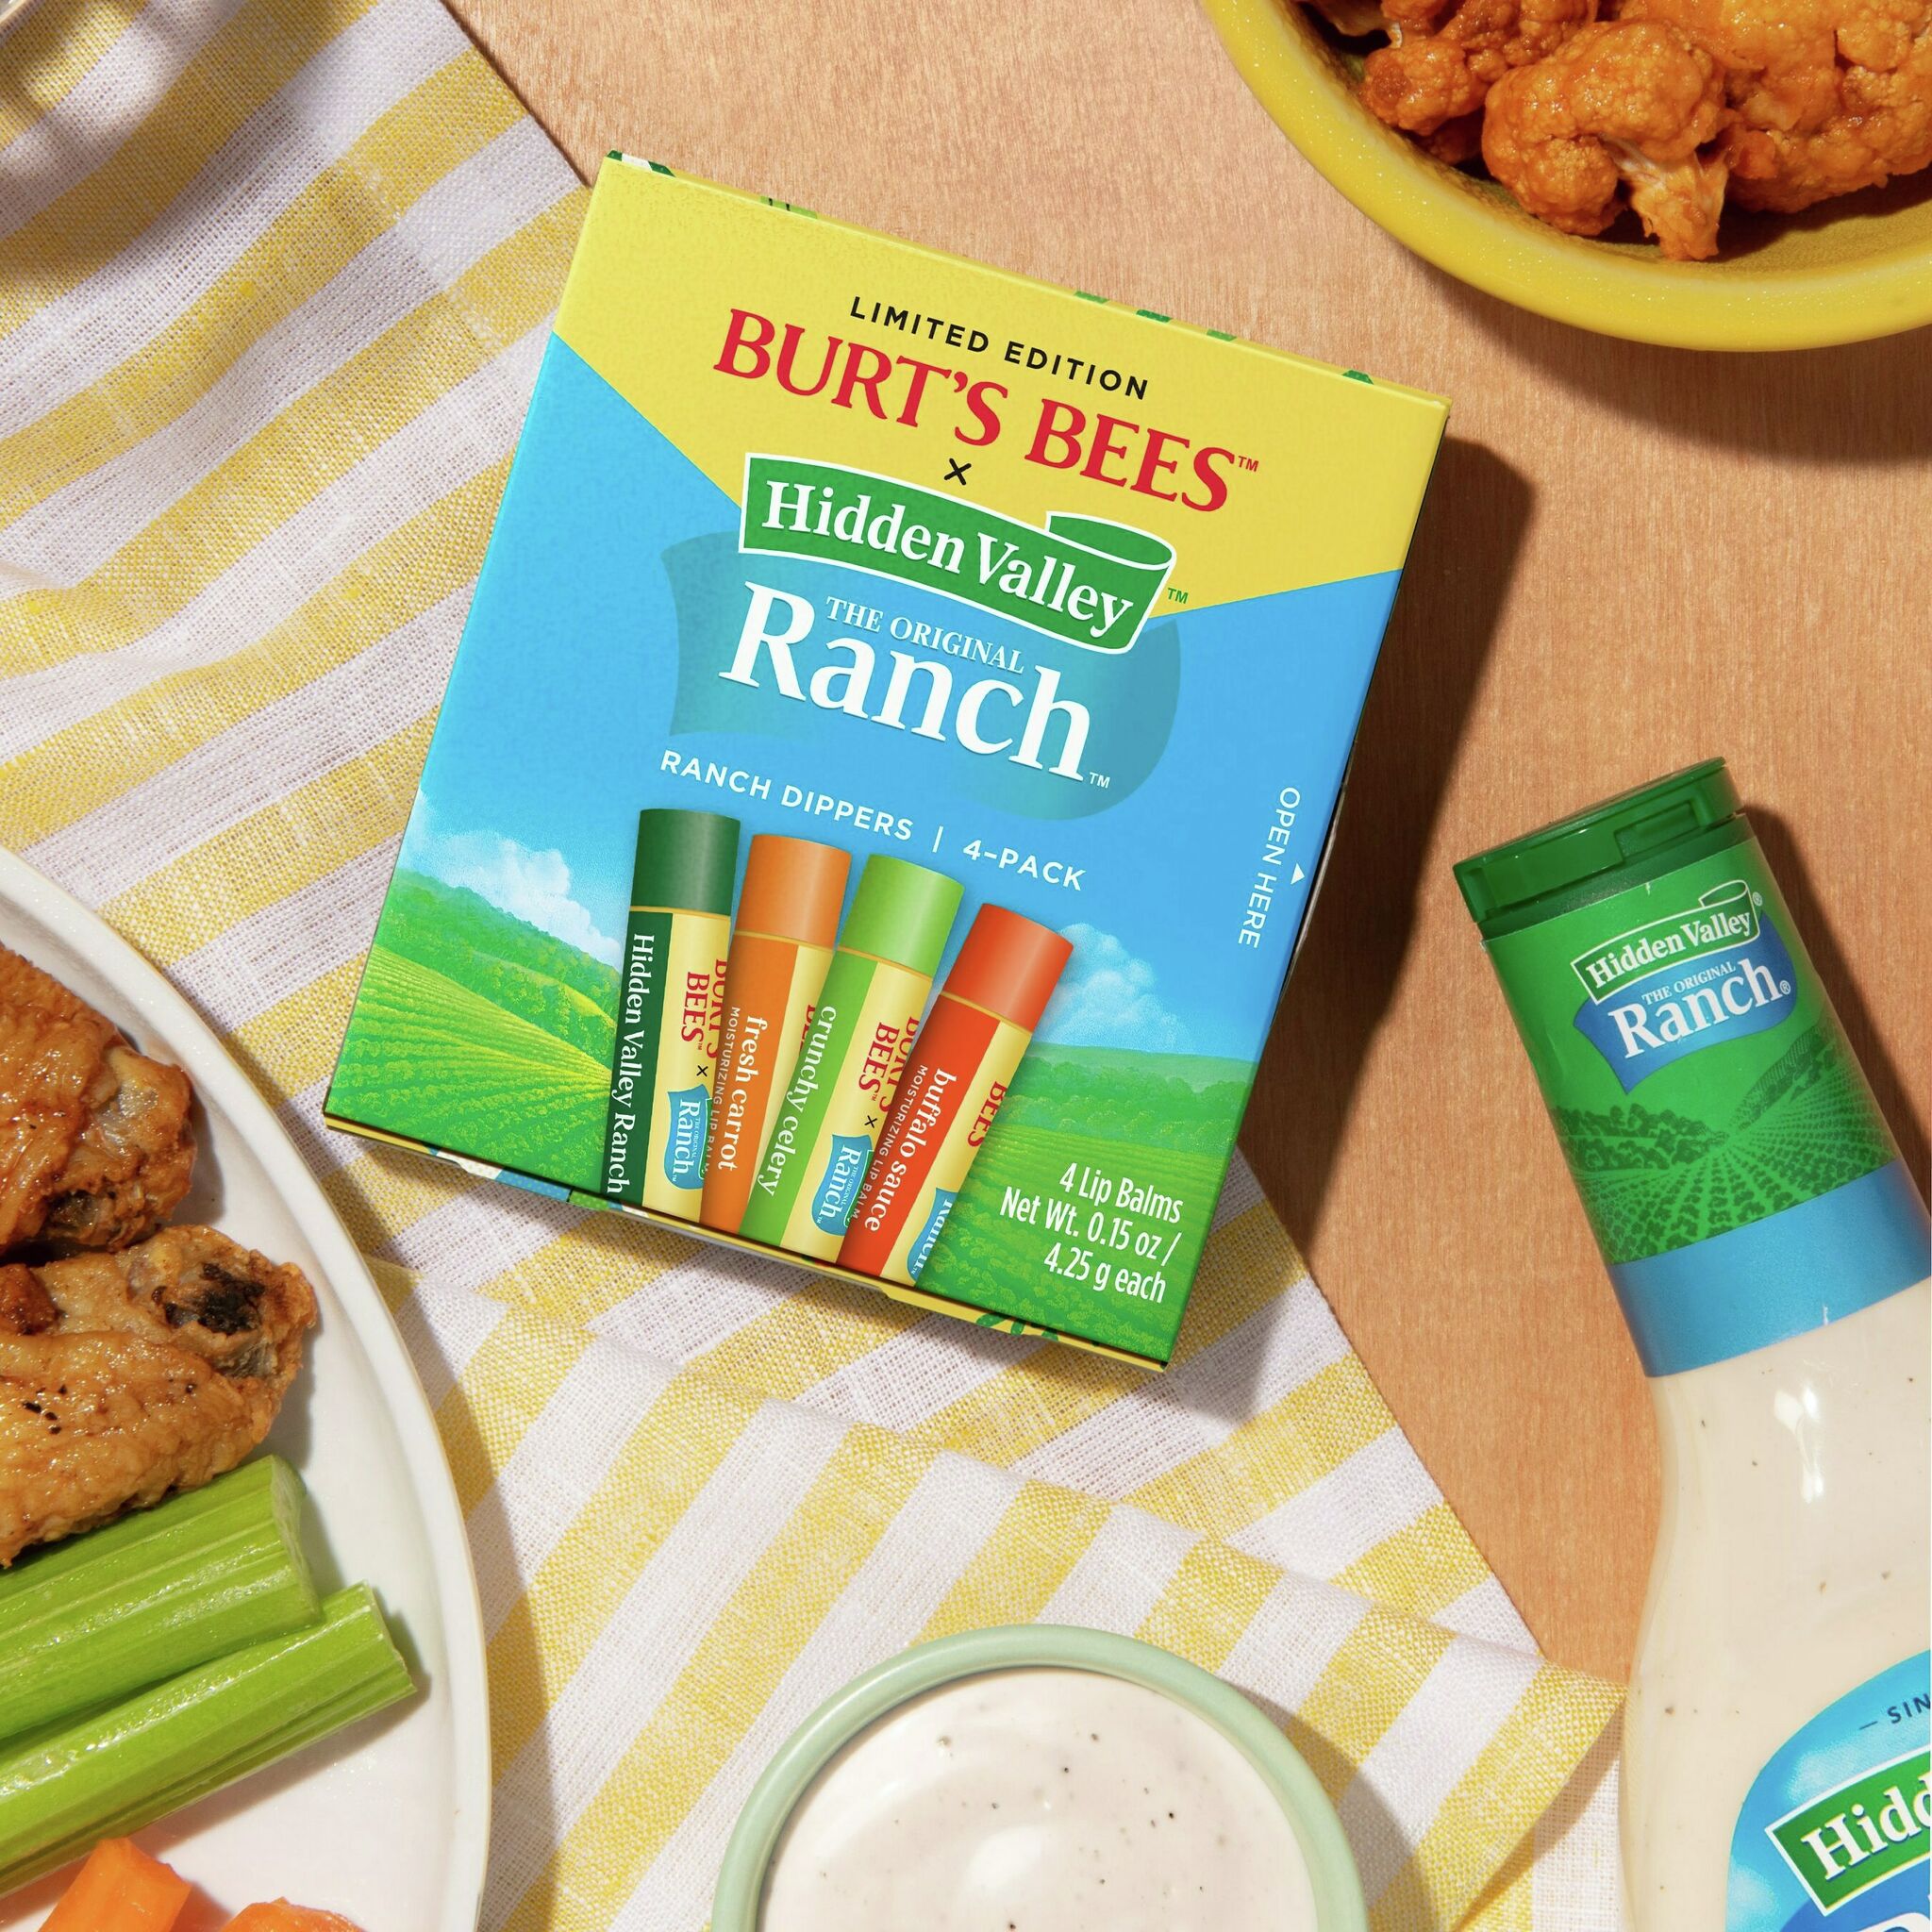 Burt's Bees and Hidden Valley spice up lip care with new flavors